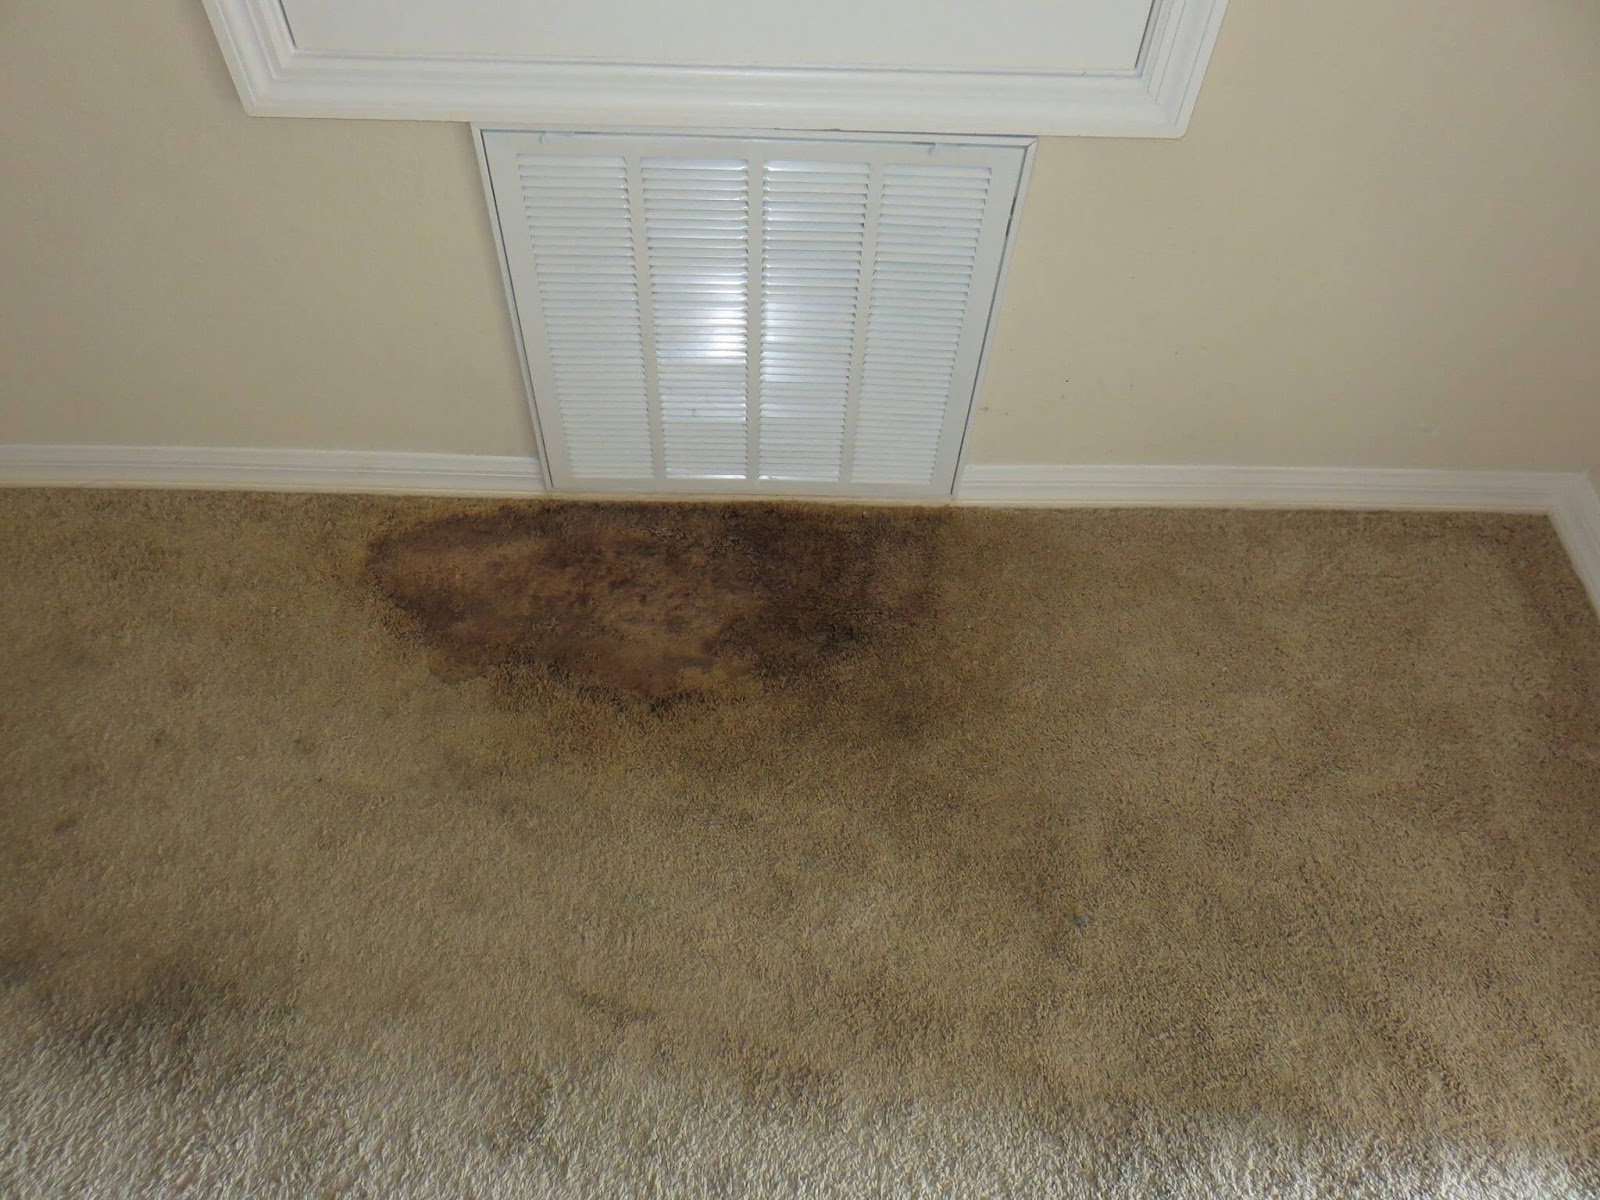 Mould Removal In Ipswich – Proficient Option To Act Quickly Against Mould